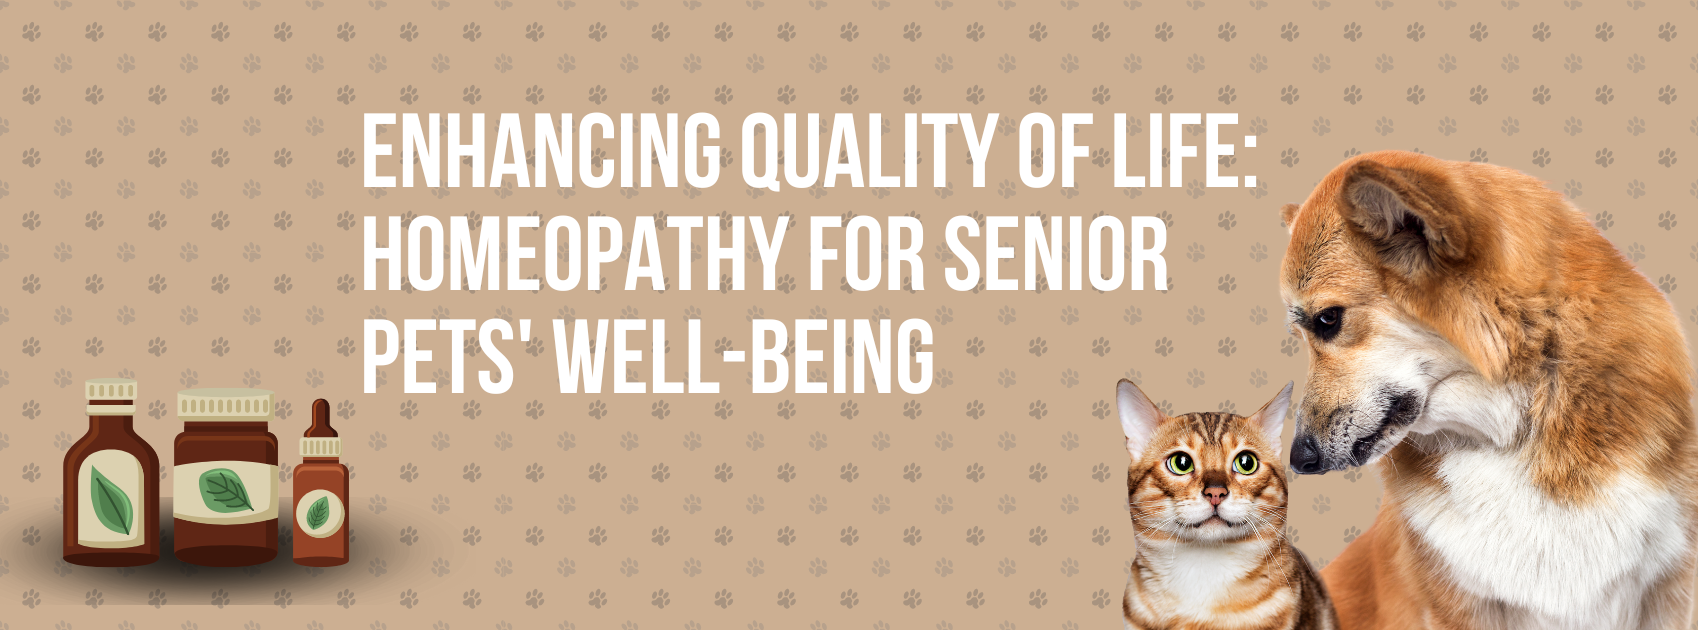 Enhancing Quality of Life: Homeopathy for Senior Pets' Well-being